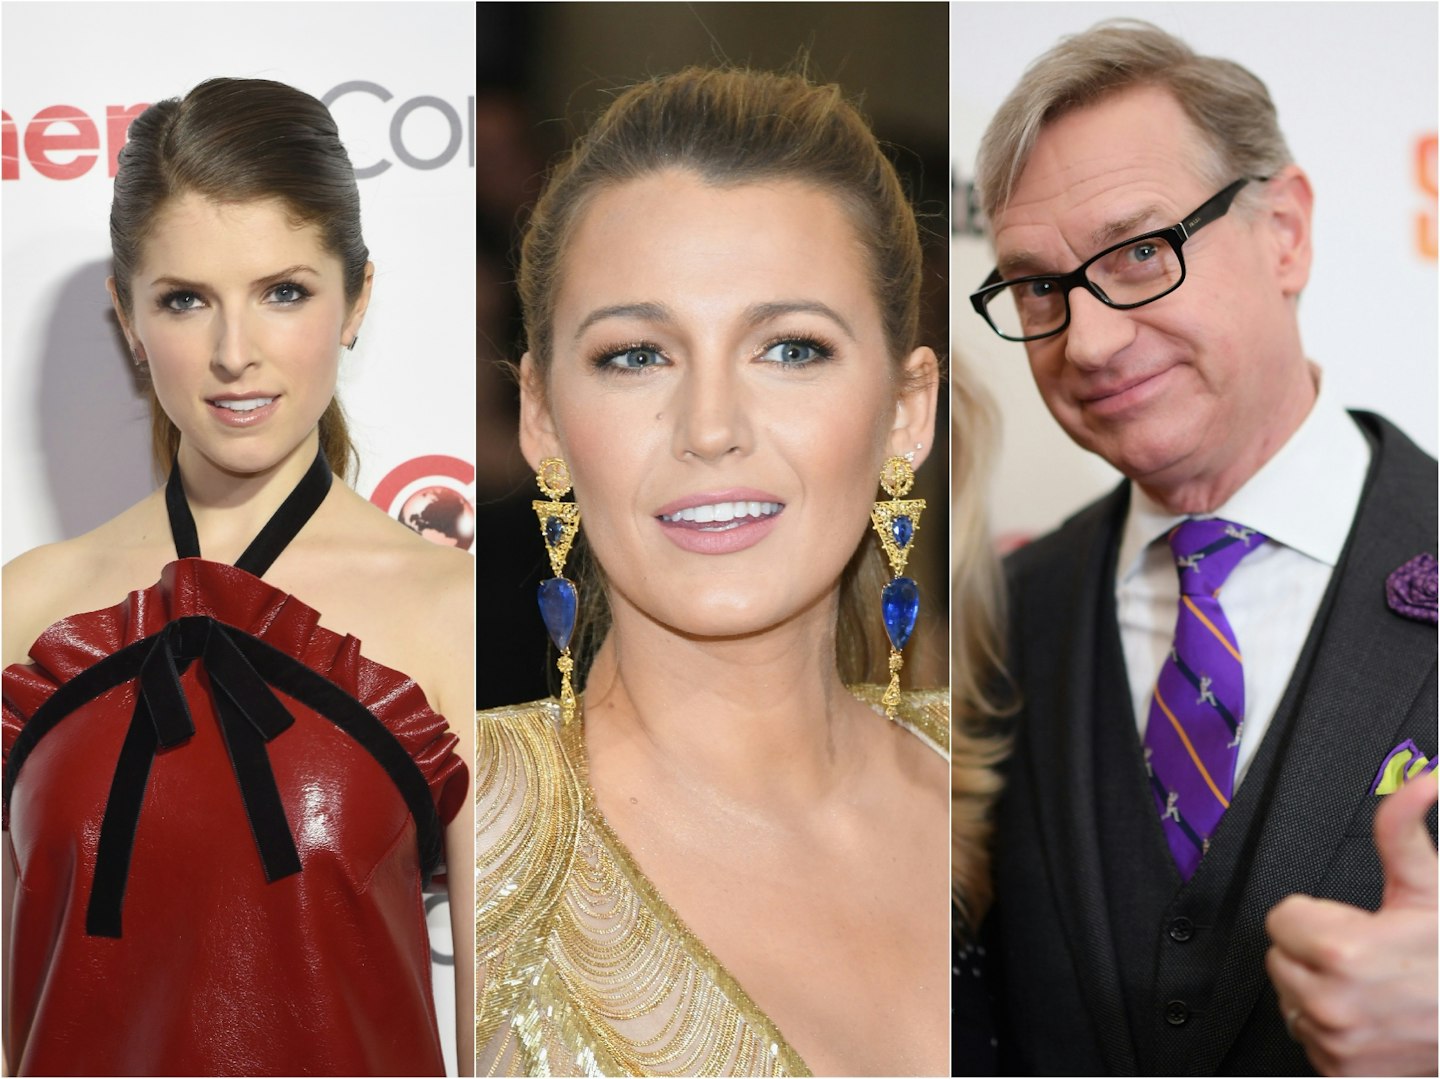 Anna Kendrick, Blake Lively and Paul Feig